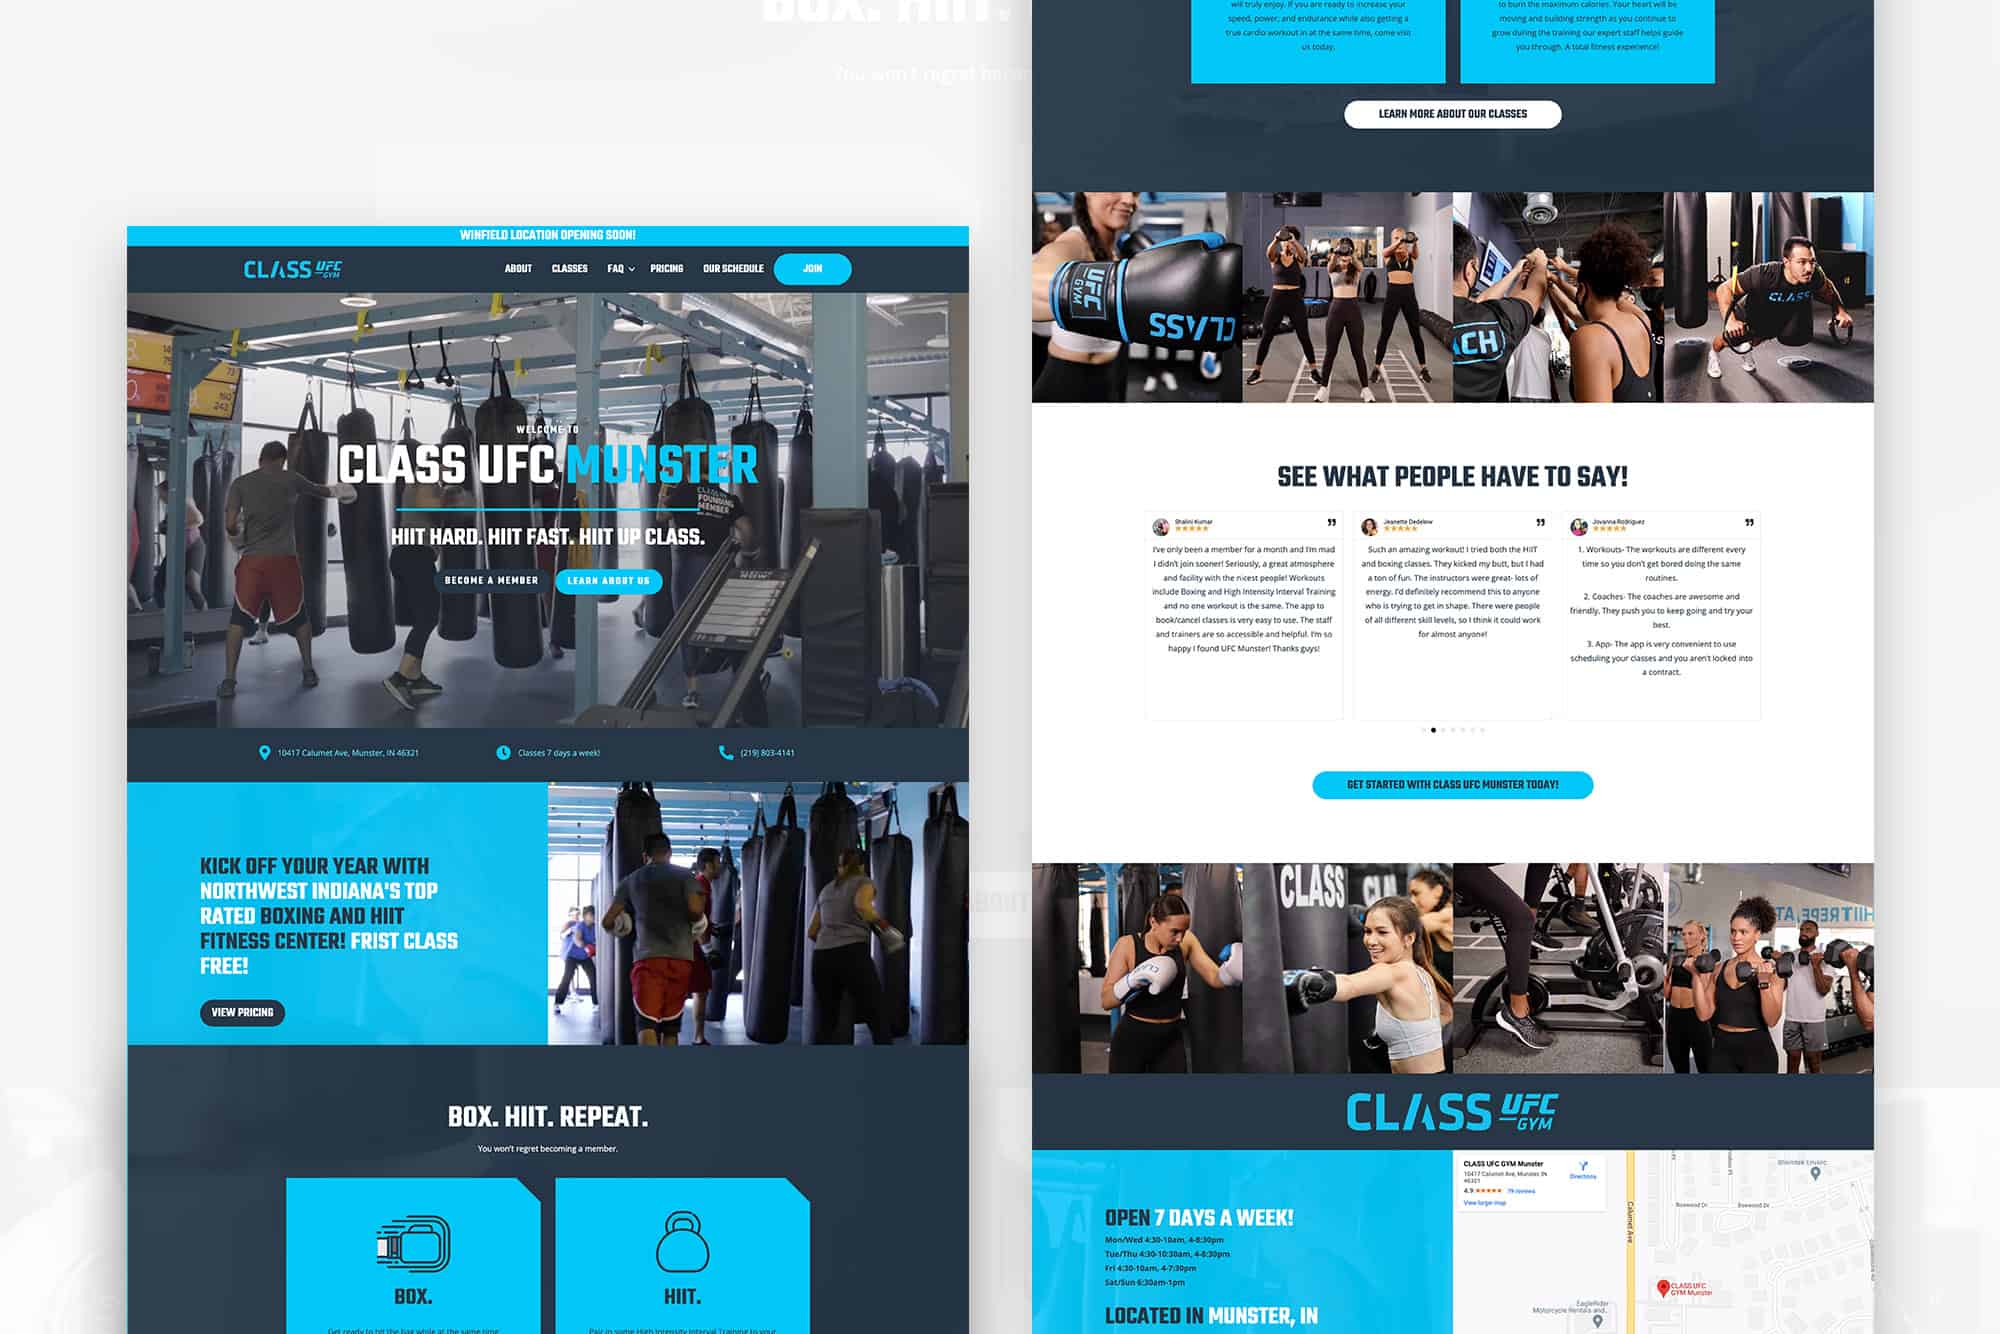 CLASS UFC Gym Munster | Web Development for Fitness Studio in Munster, IN 1